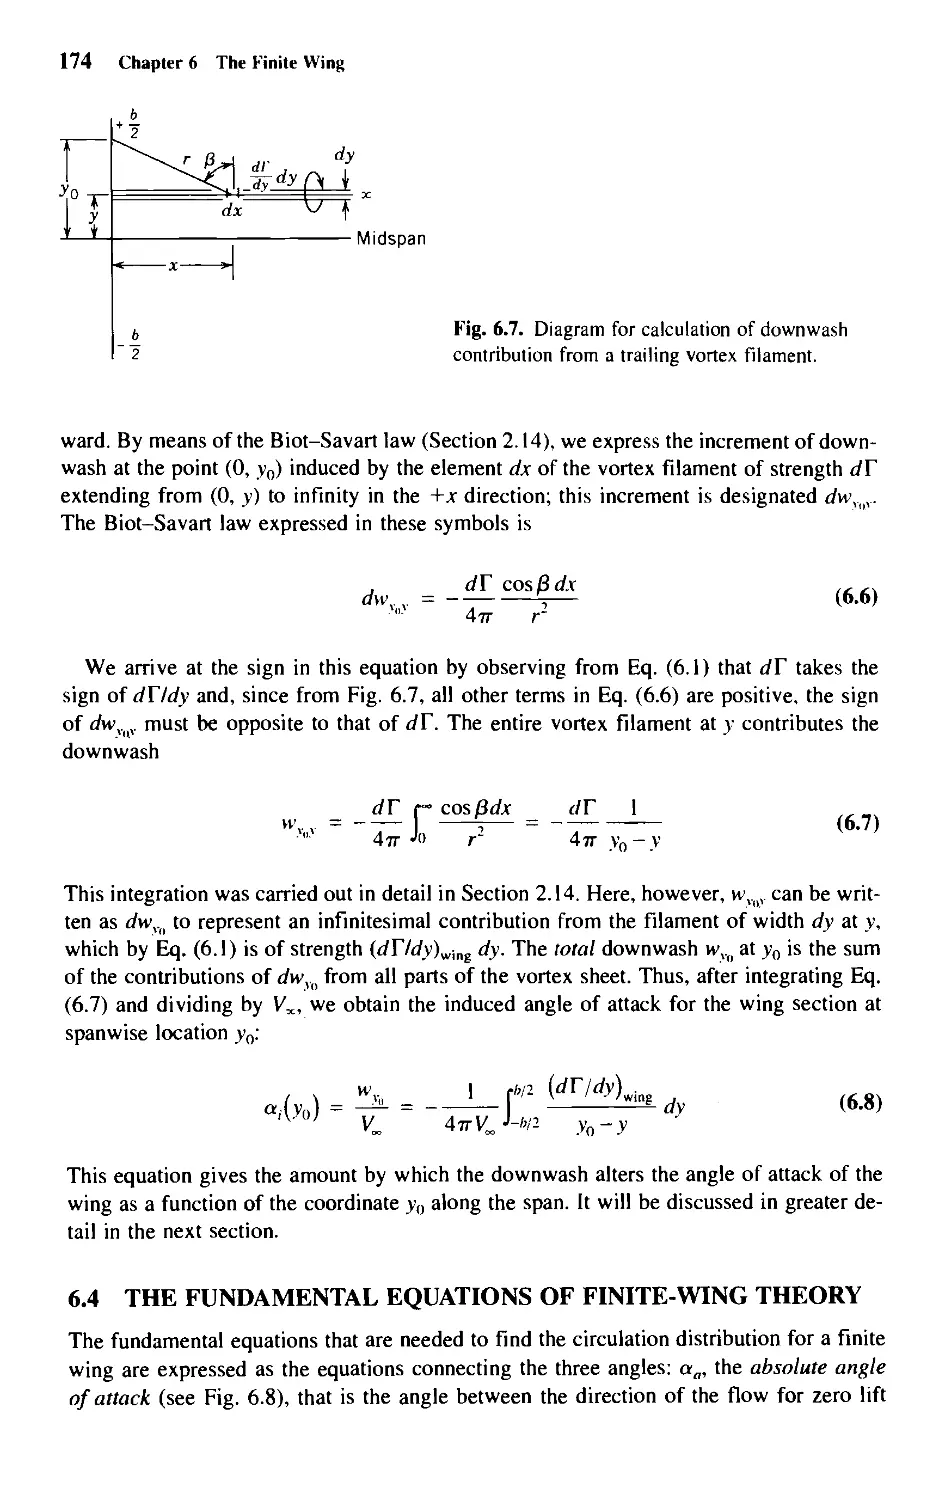 6.4 - The Fundamental Equations of Finite-Wing Theory